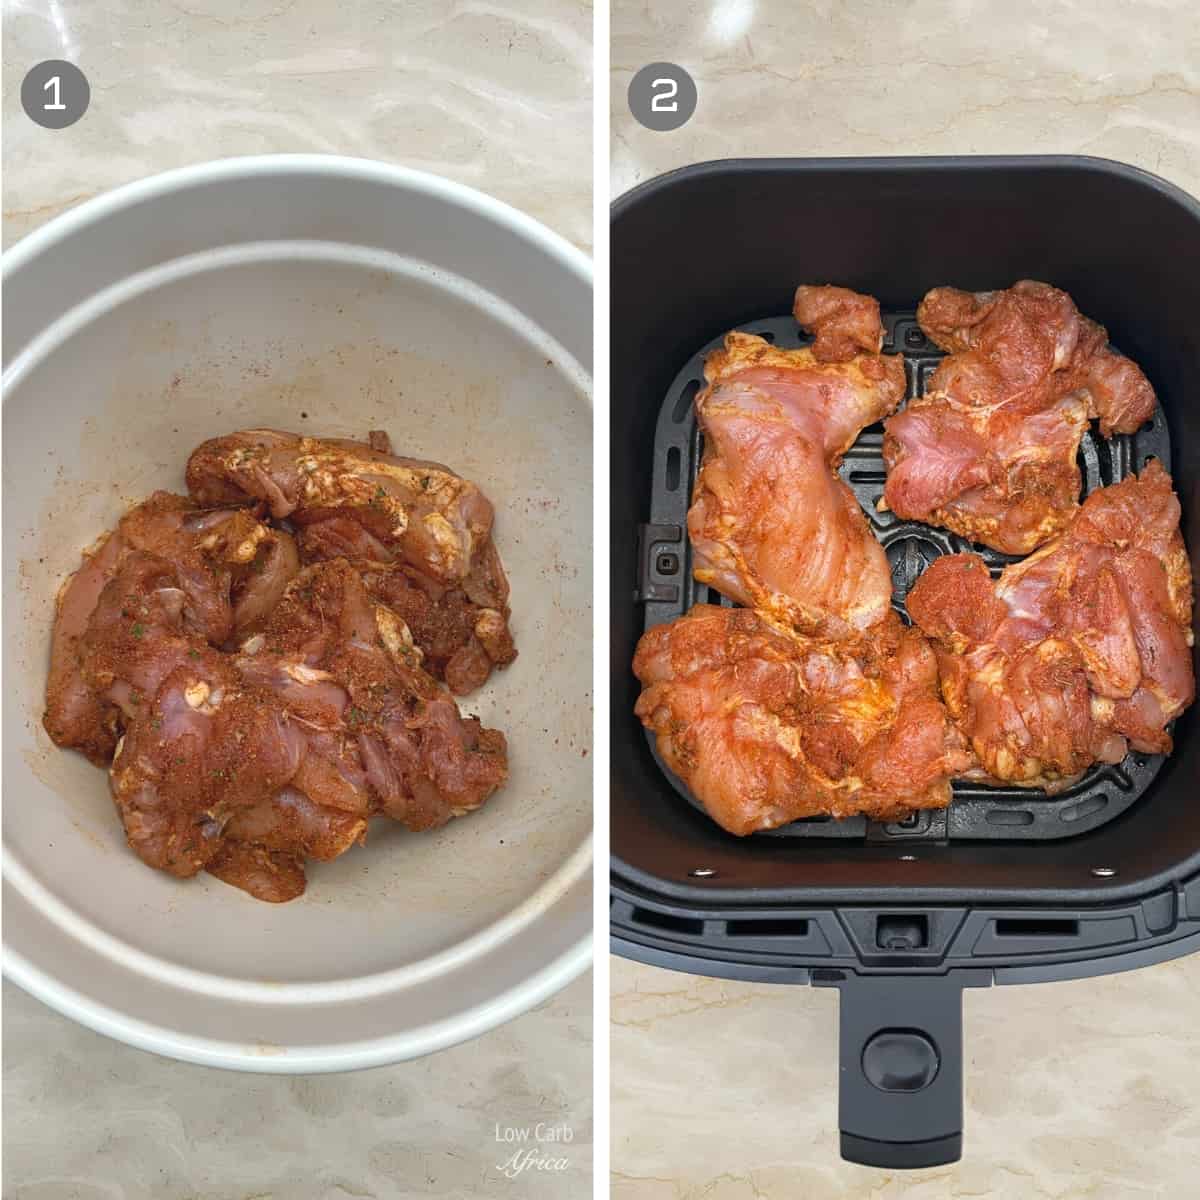 Introducing how to make boneless chicken thighs.